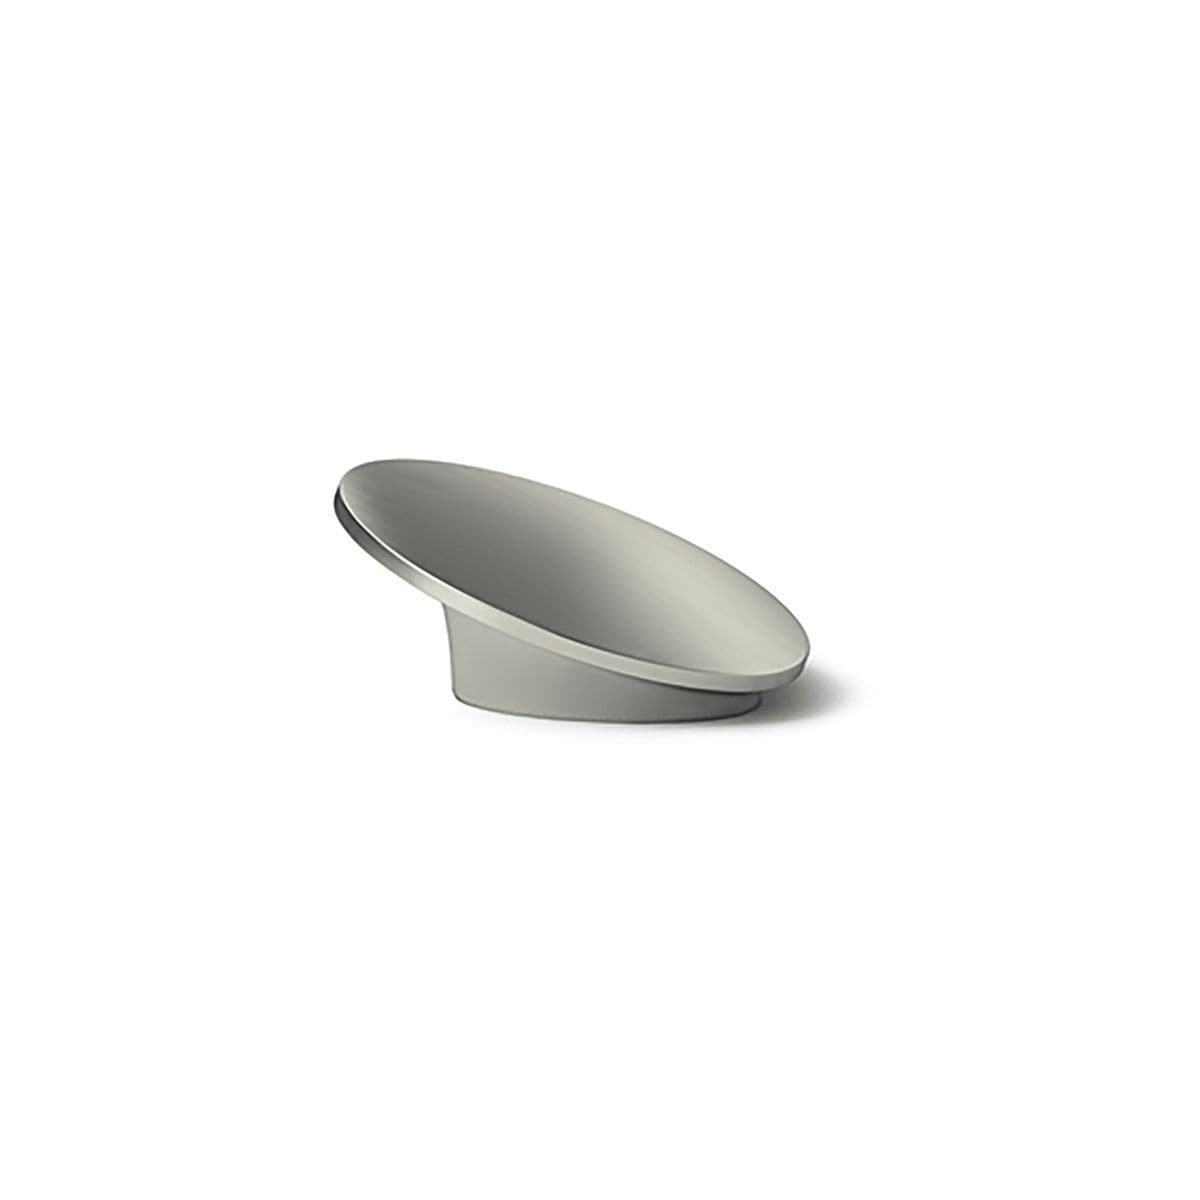 AMISIA KNOB PULL Cupboard Handle - 32mm h/c size - BRUSHED S/STEEL LOOK finish (HETTICH - Deluxe)